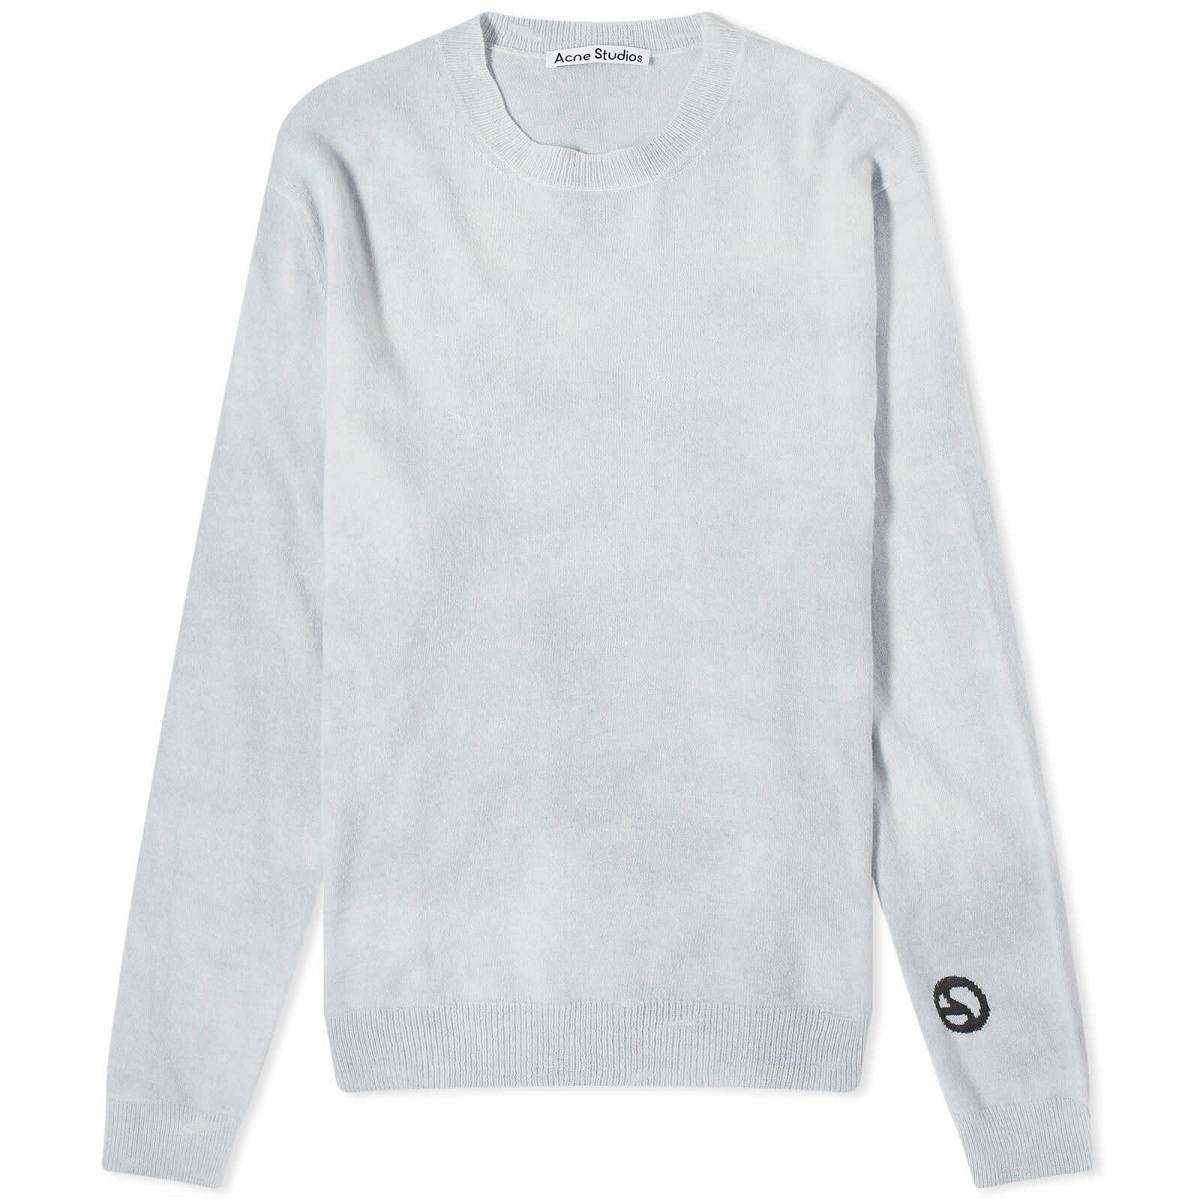 ACNE STUDIOS Kimothy Distressed Jacquard-Knit Rollneck Sweater for